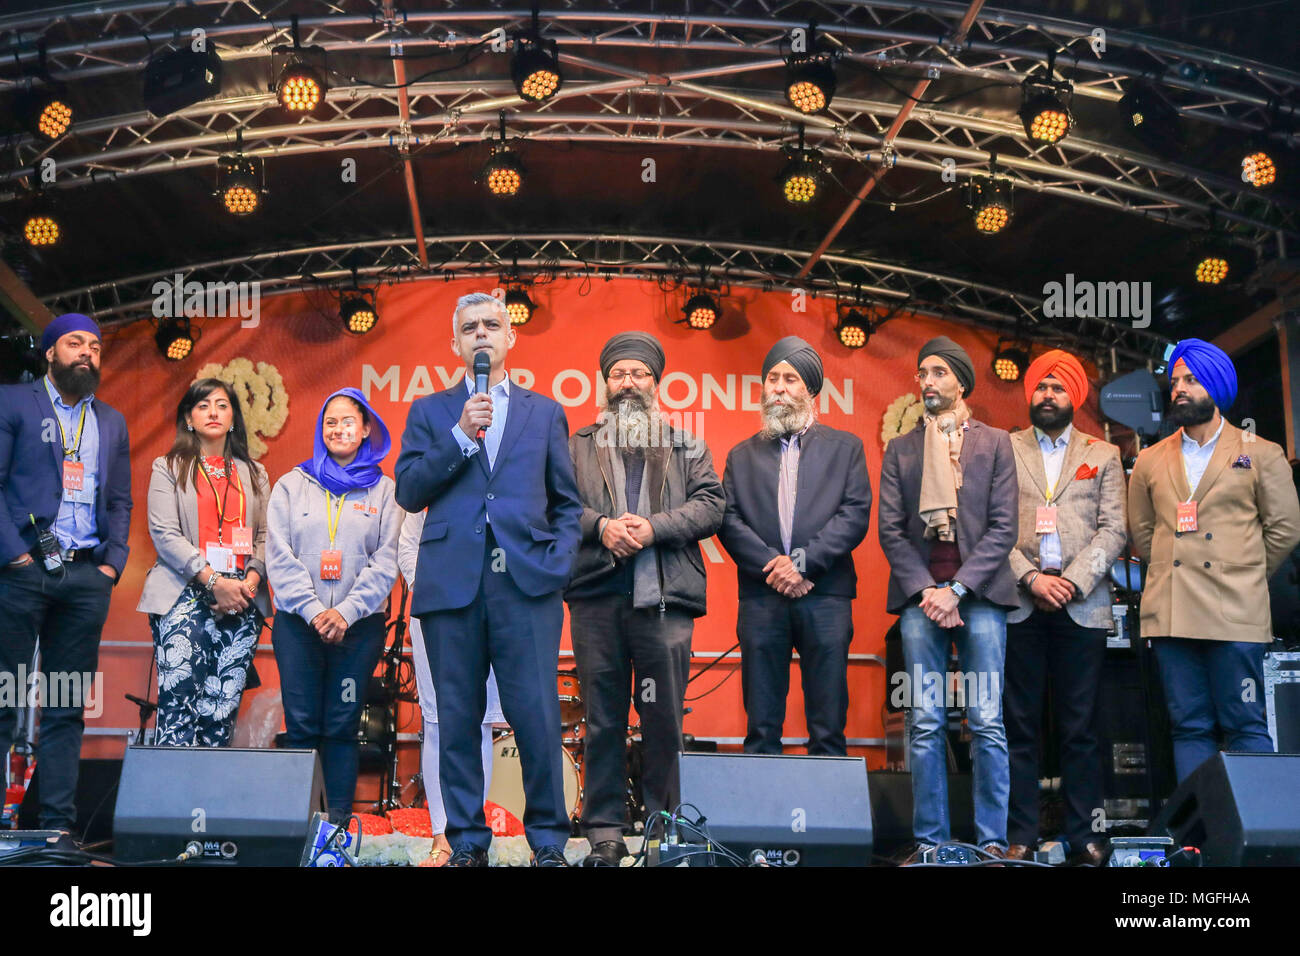 London UK. 28th Aril 2018. Londo Mayor Sadiq Khan attends Vaisakhi festival in Trafalgar Square which celebrates Sikh and Punjabi tradition, heritage and culture Credit: amer ghazzal/Alamy Live News Stock Photo